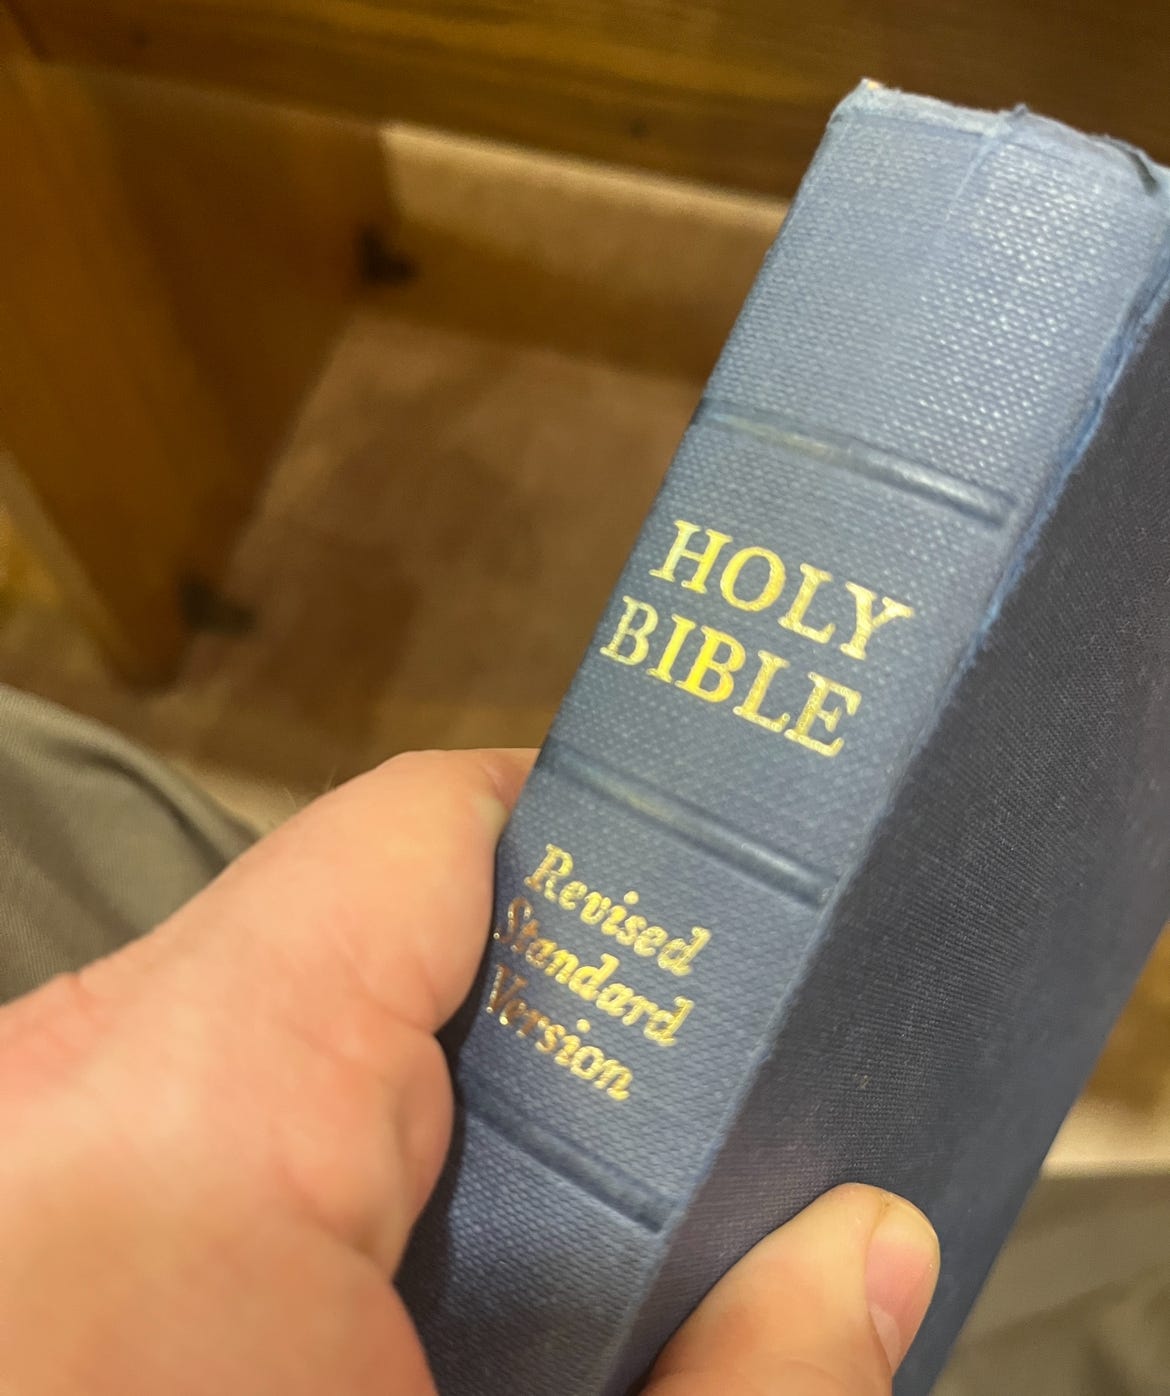 An old copy of a bible in my hands 